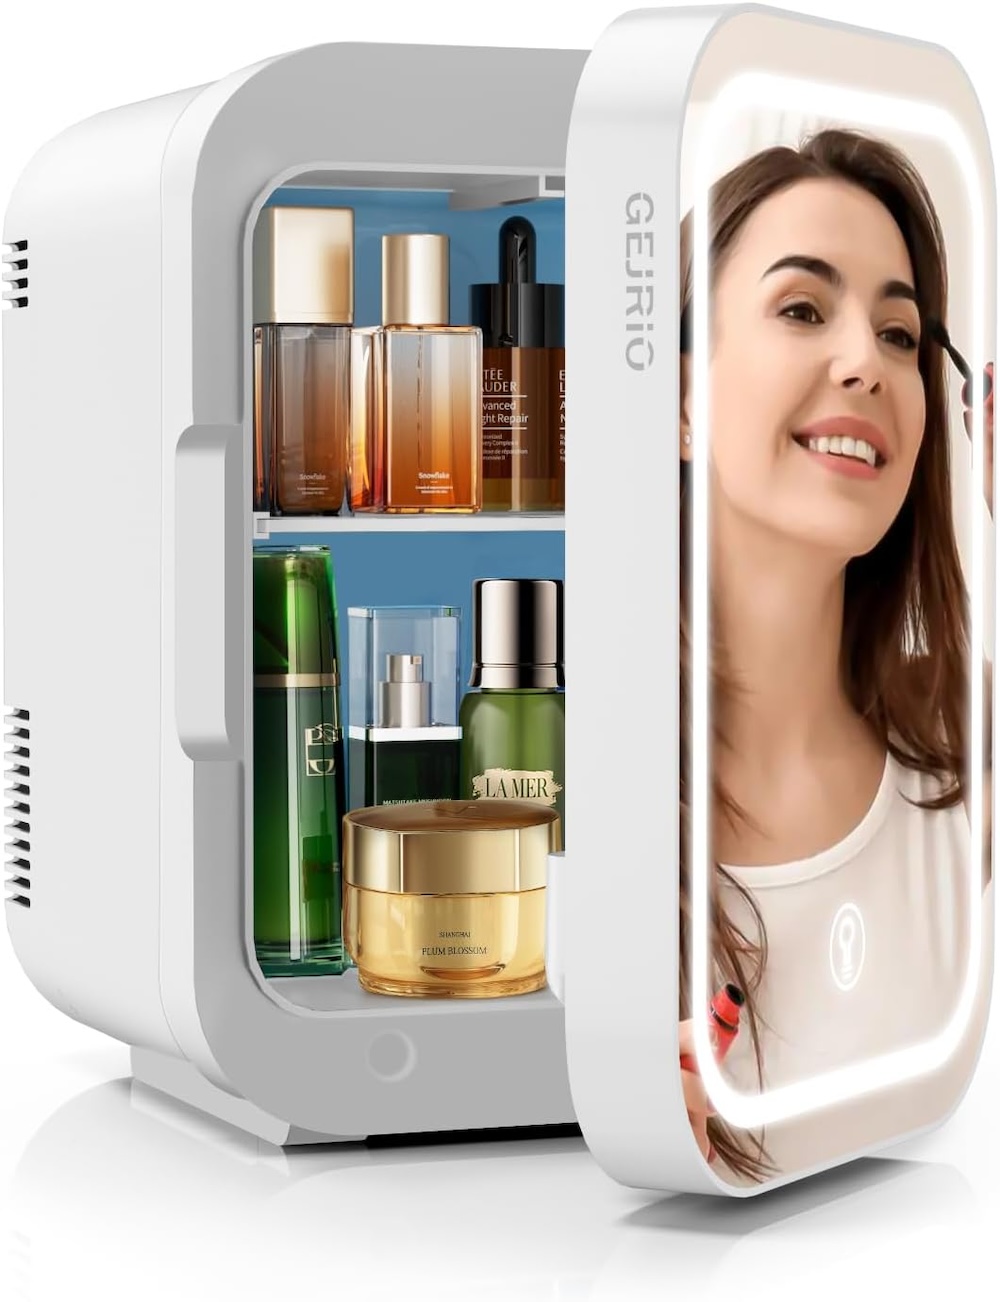 A skincare minifridge with a mirror on the front showing a person applying makeup